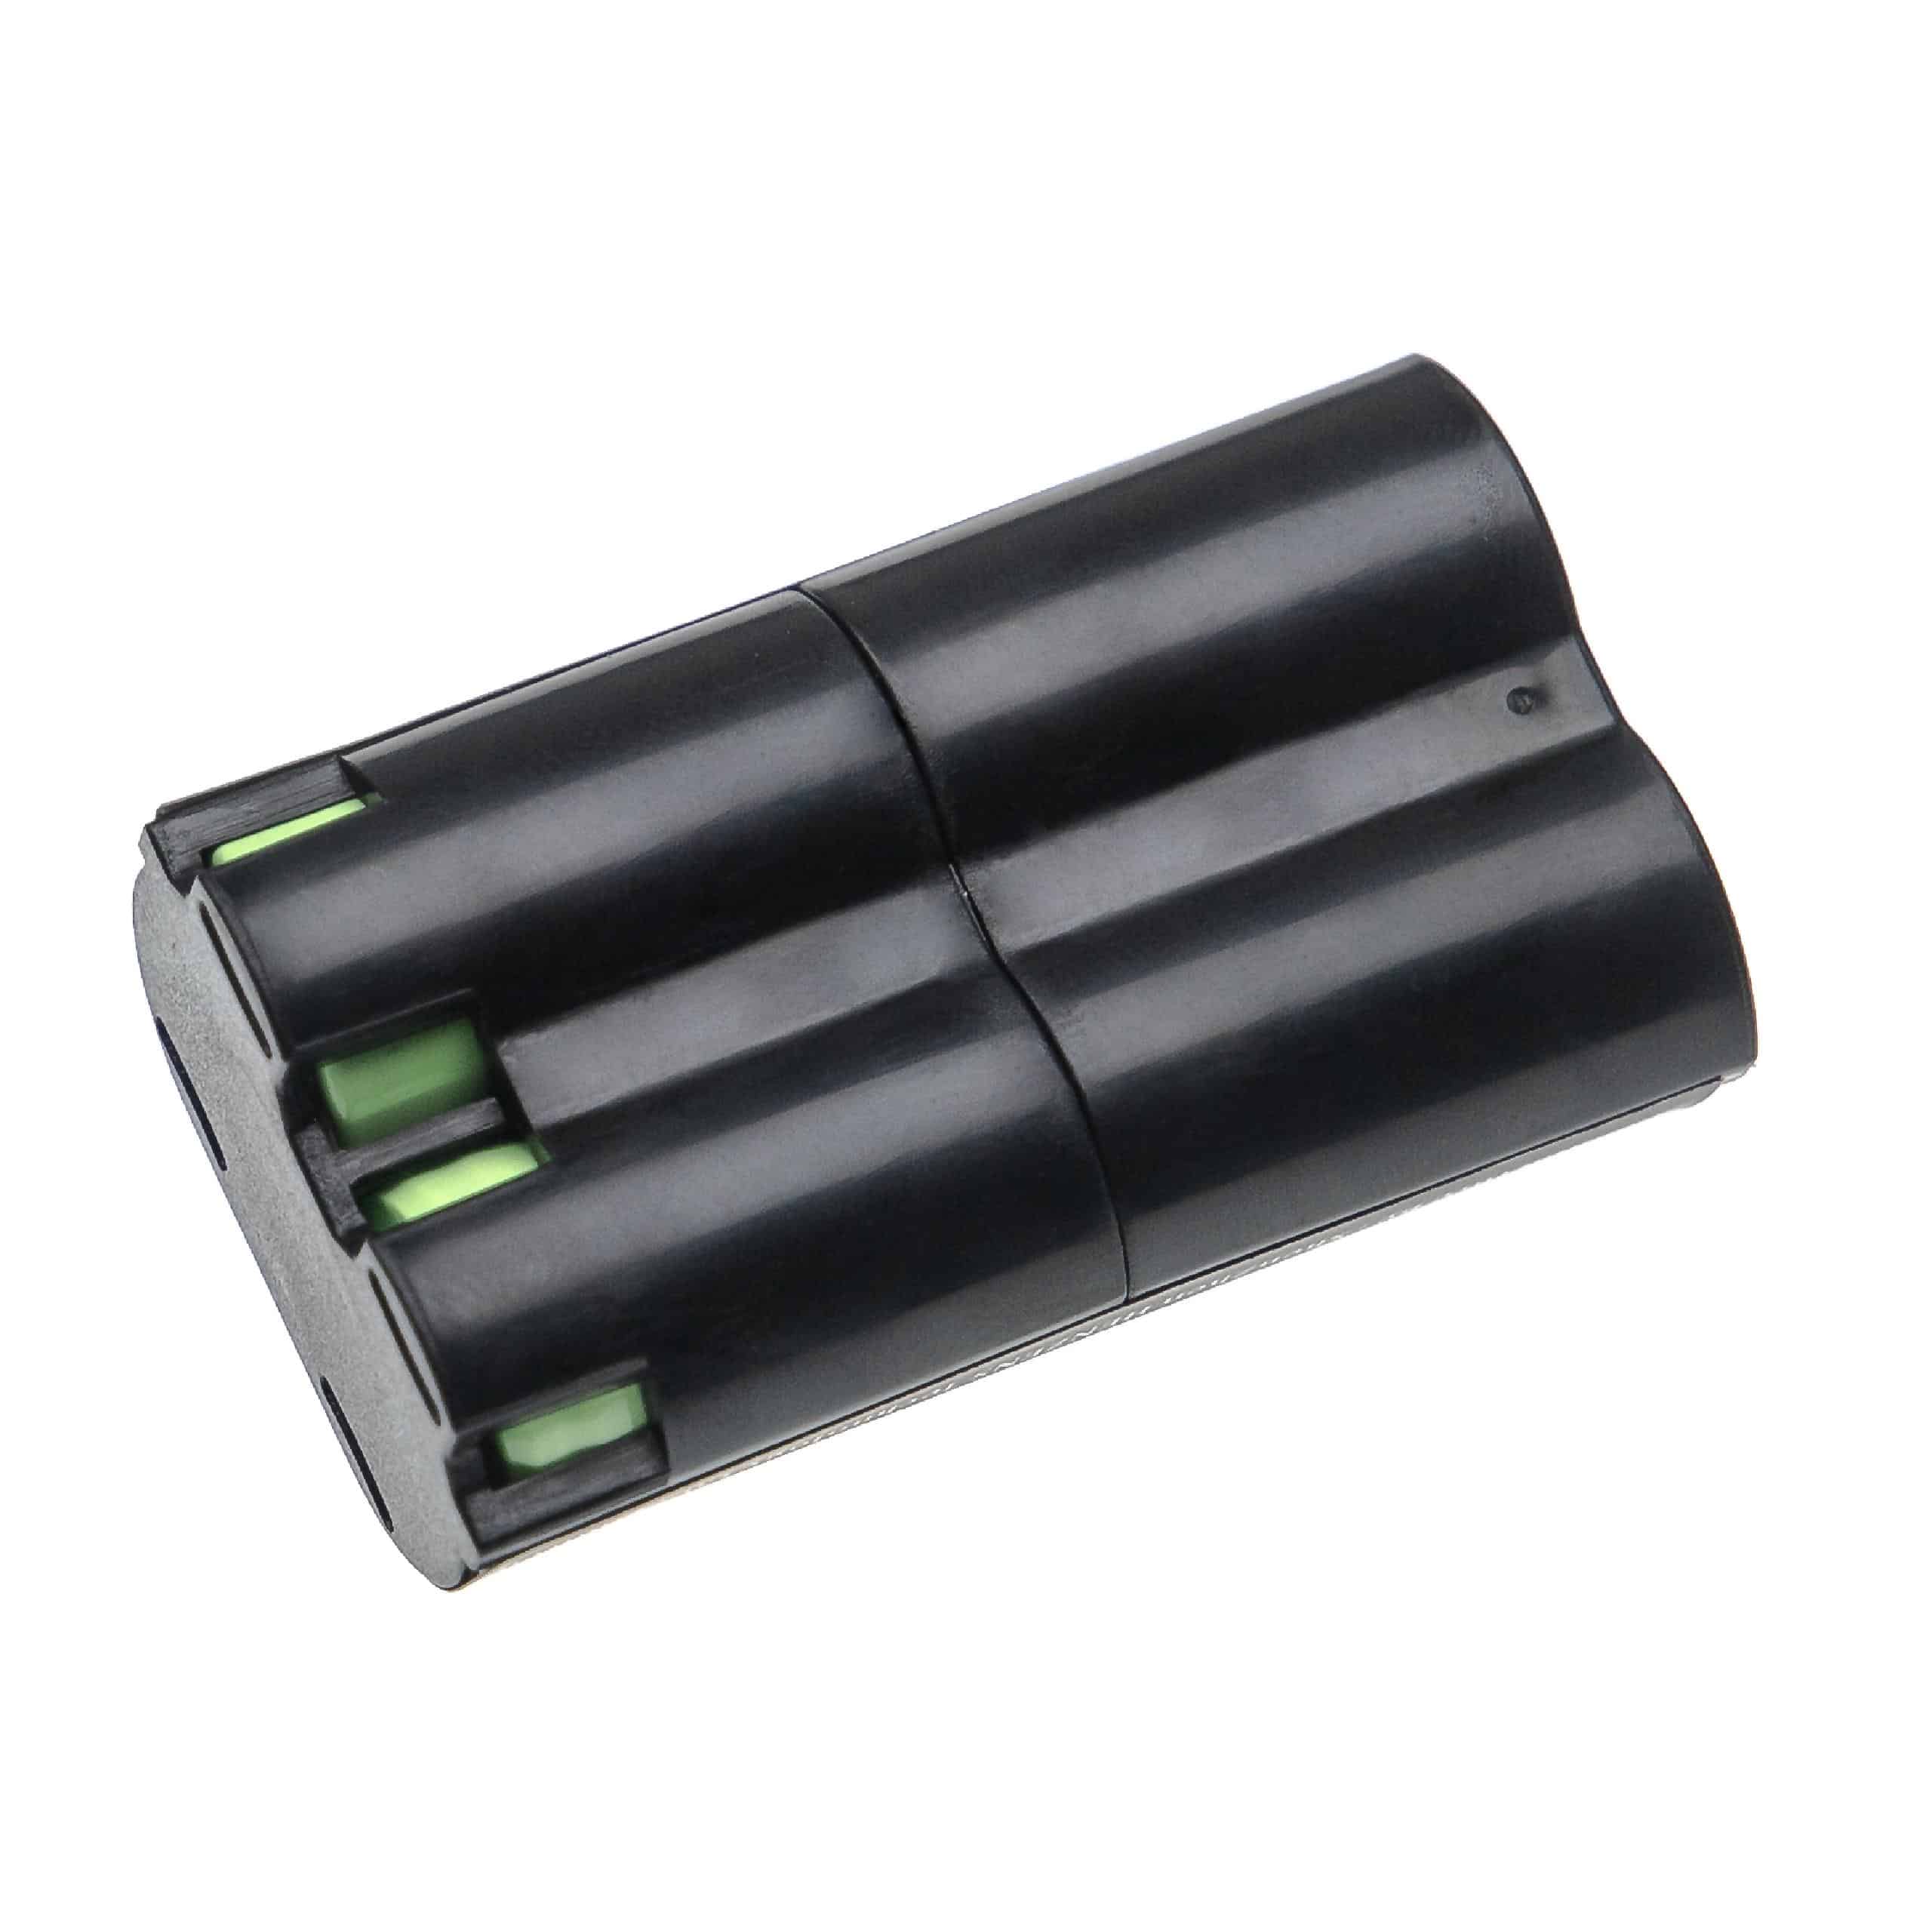 Baby Monitor Battery Replacement for Philips PHRHC152M000, 996510072099 - 1500mAh 2.4V NiMH